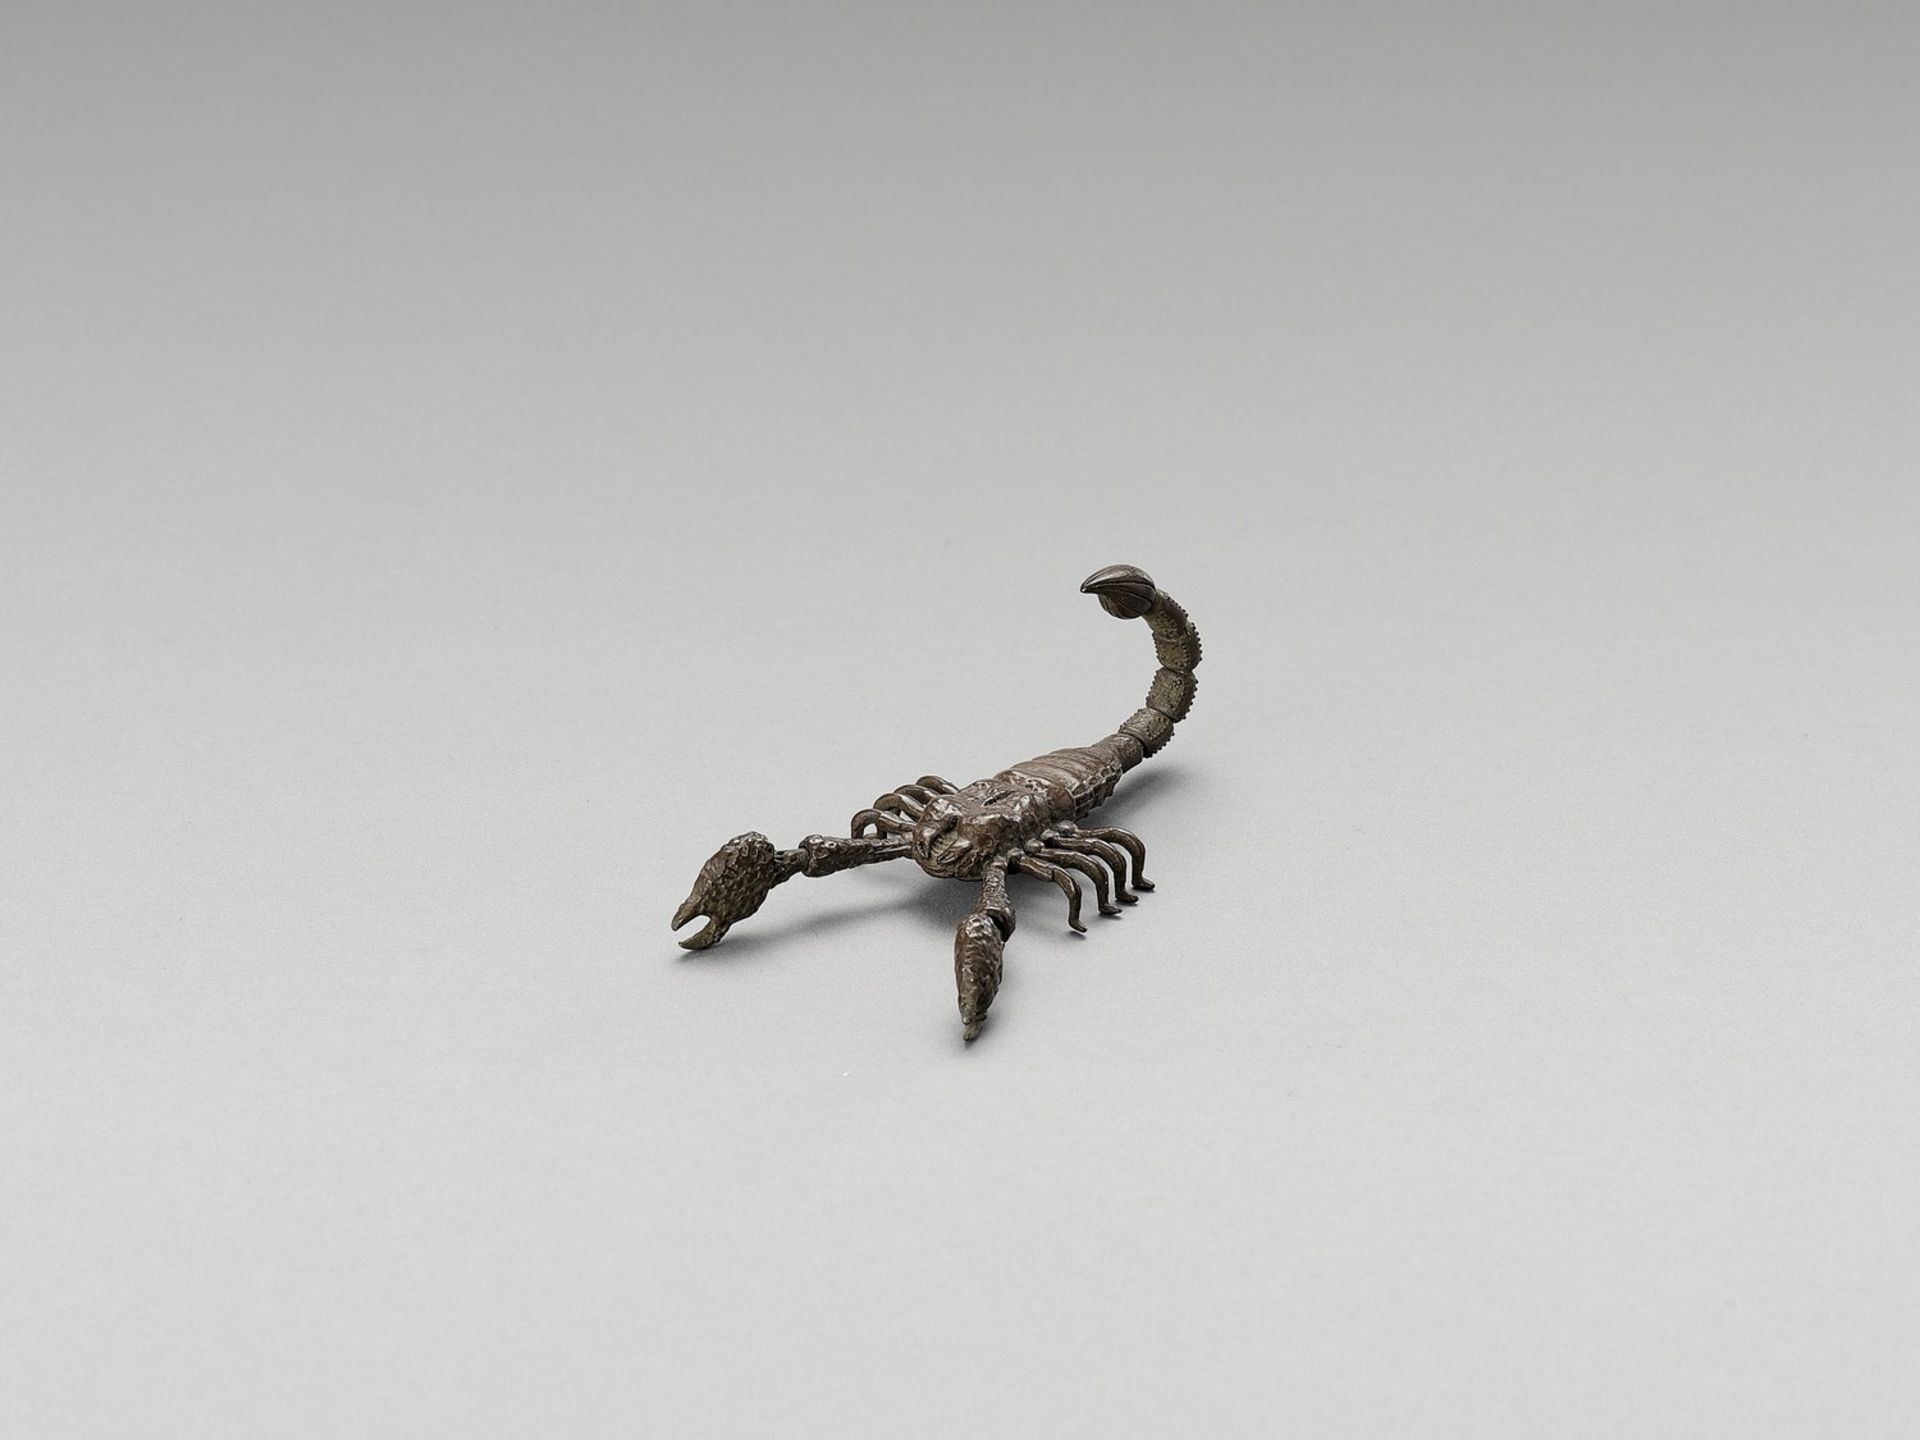 AN ARTICULATED BRONZE OKIMONO OF A SCORPION - Image 2 of 4